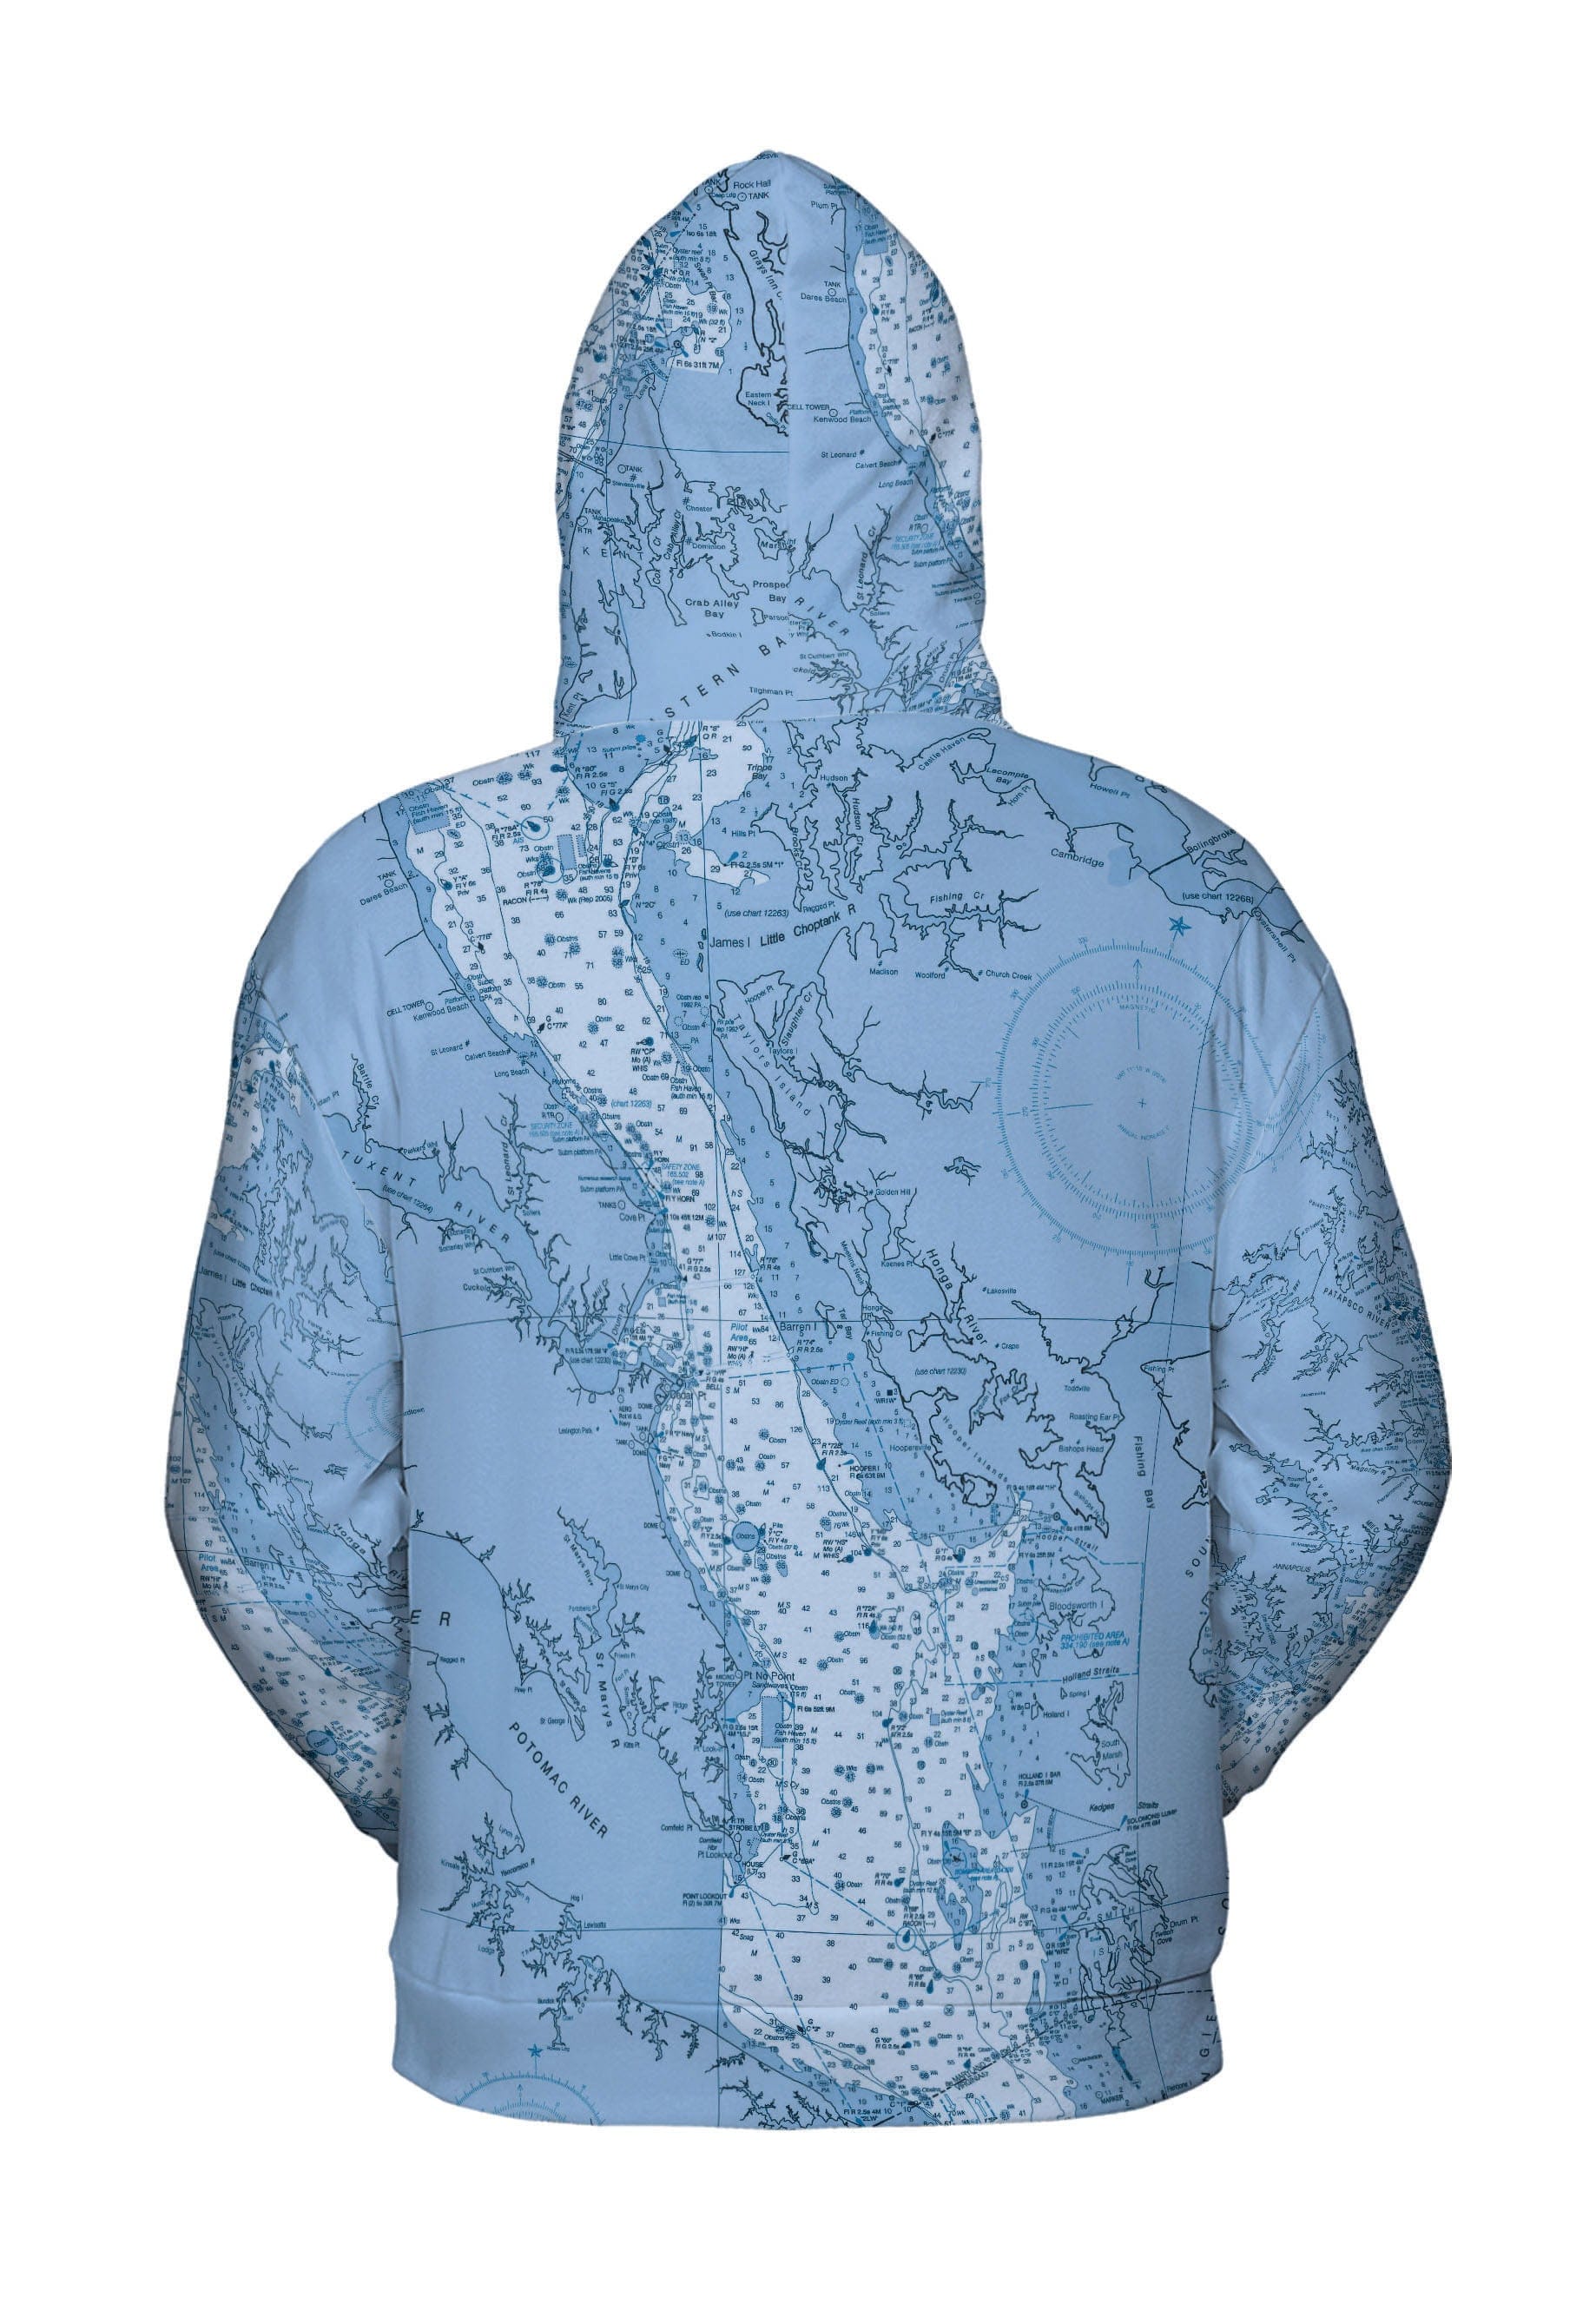 The Upper and Middle Chesapeake Bay Blues Lightweight Hoodie Sweatshirt